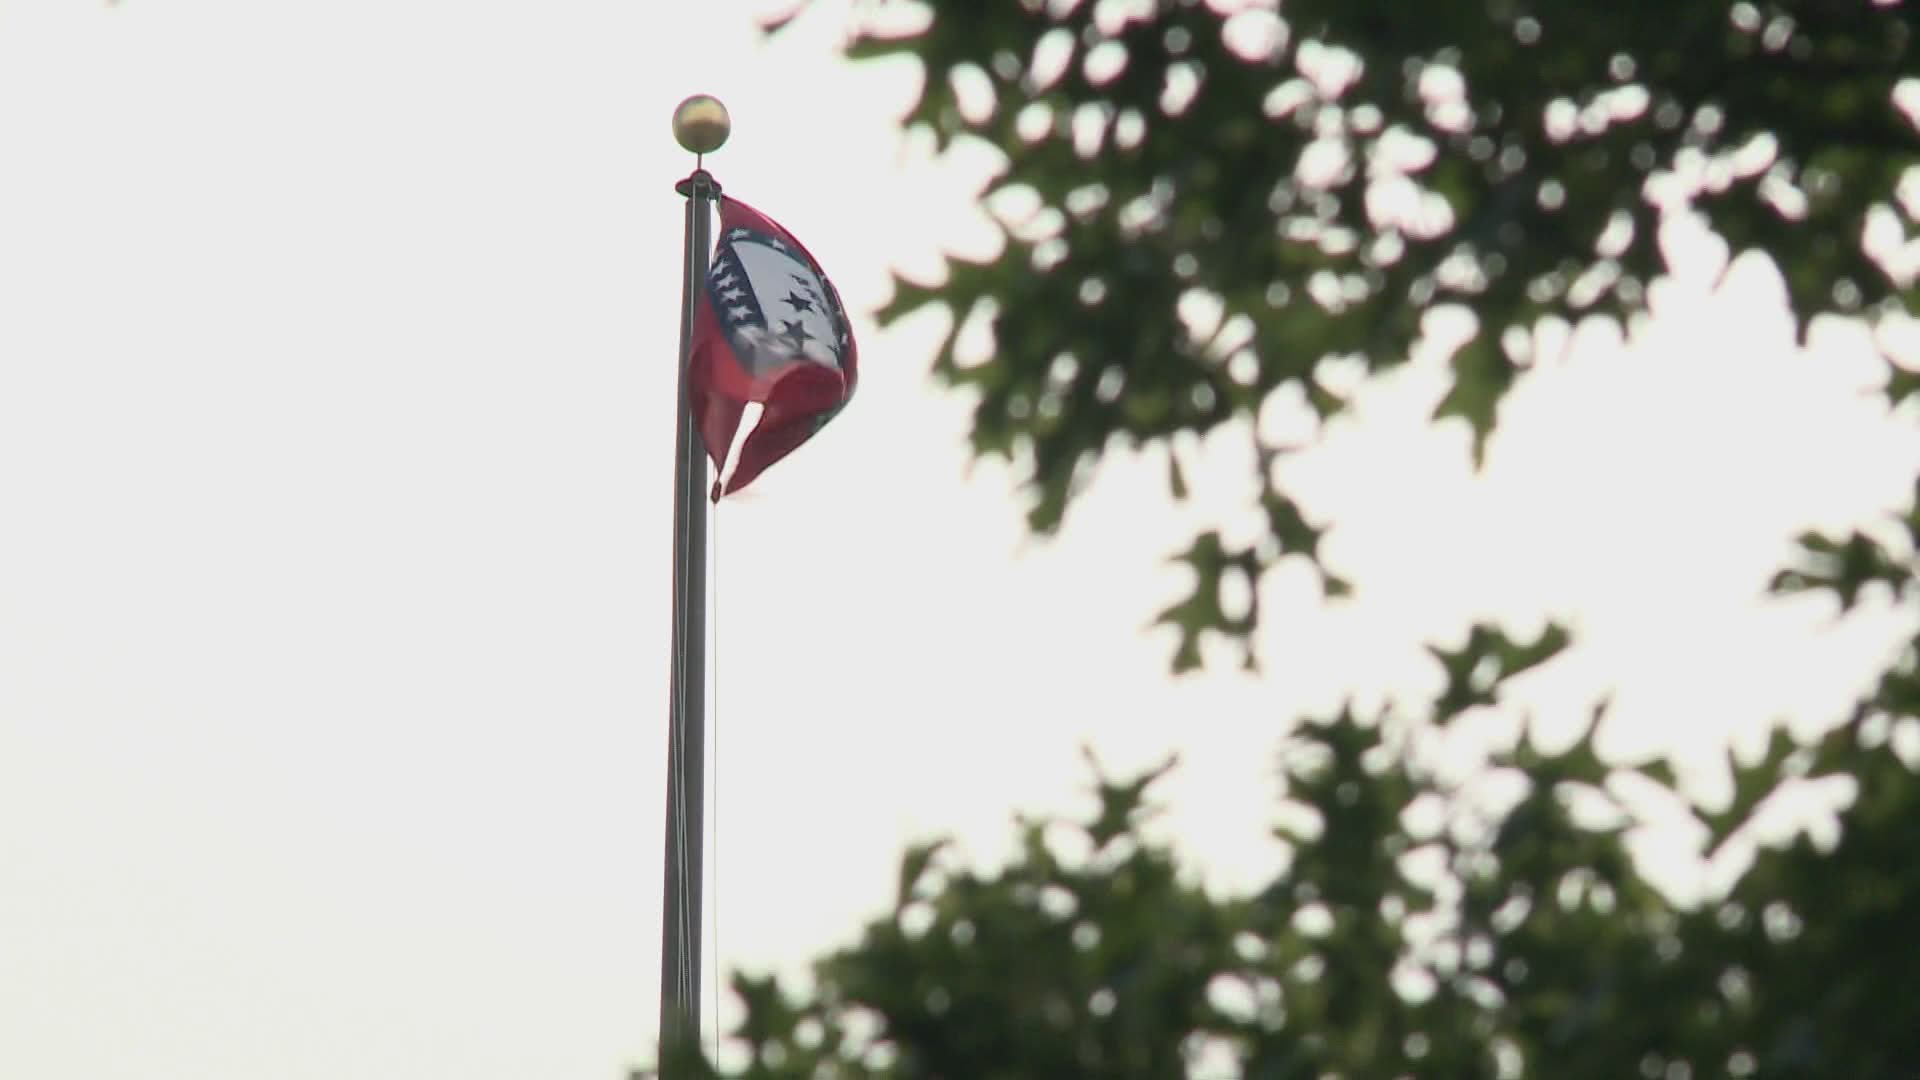 The city of Little Rock became the first city in the state to pass a hate crime ordinance.